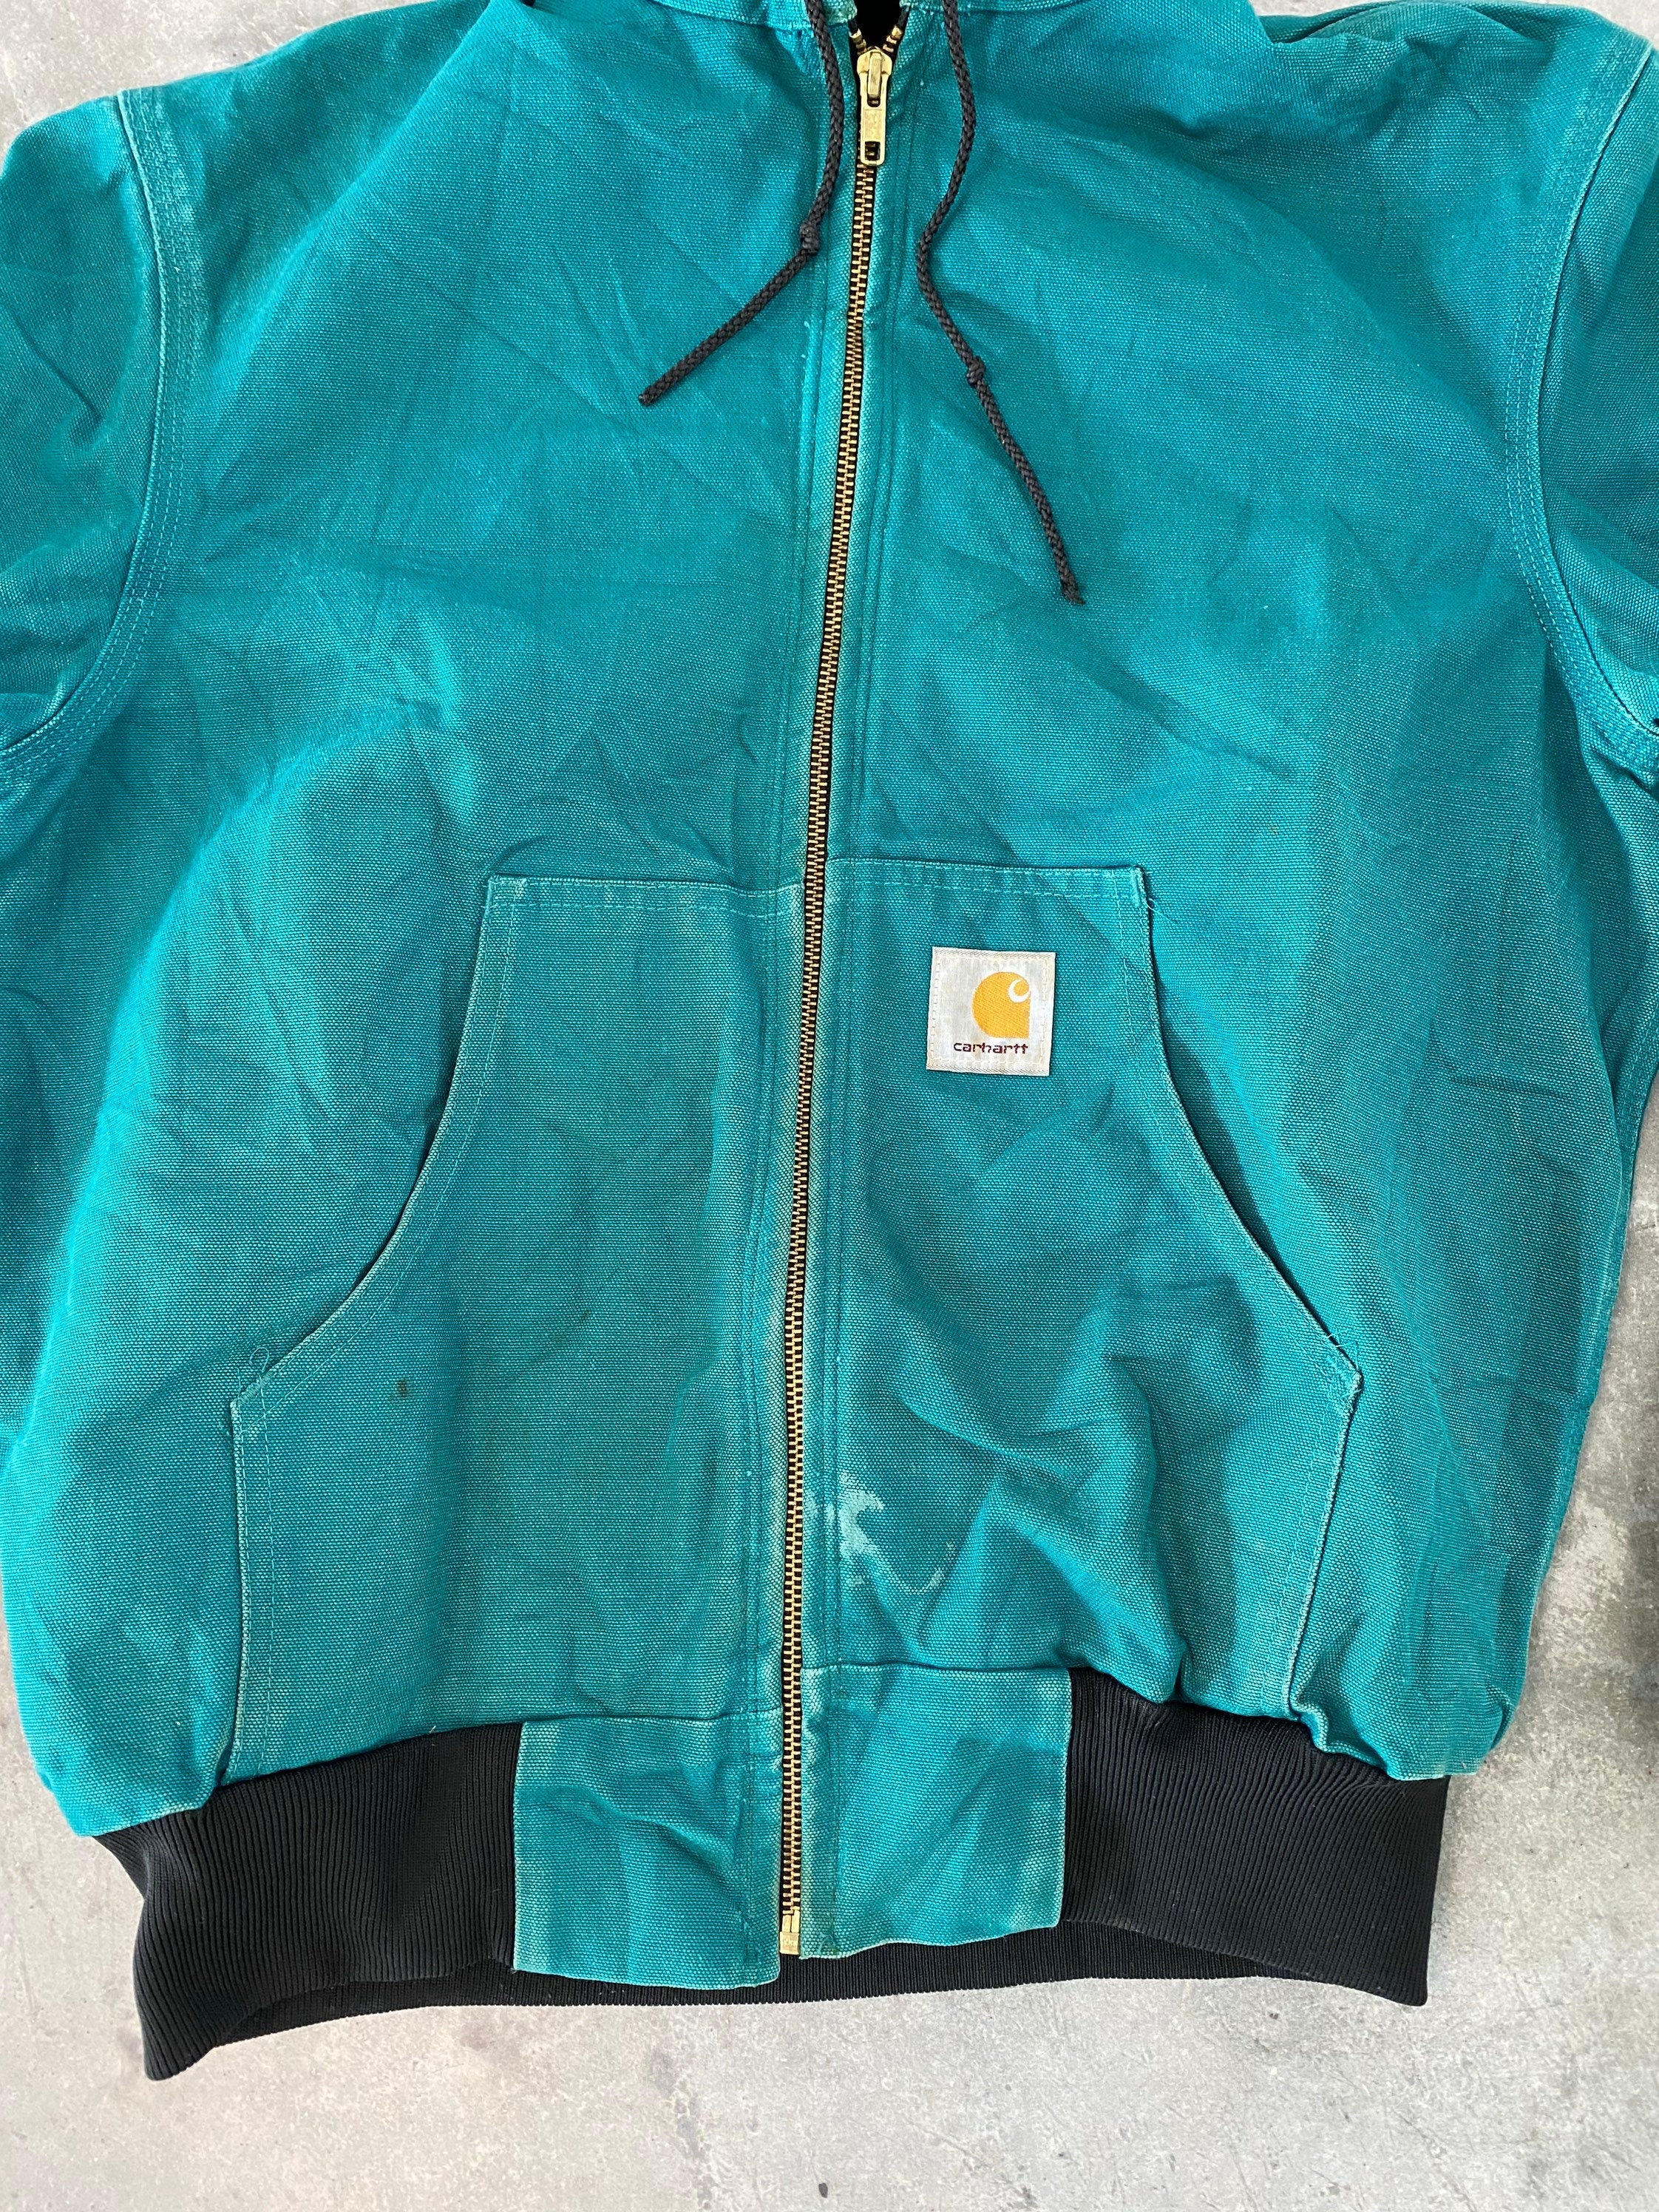 Vintage Hooded Carhartt Jacket Teal Quilted Lining Large Needs Zipper Repair  Union Made 